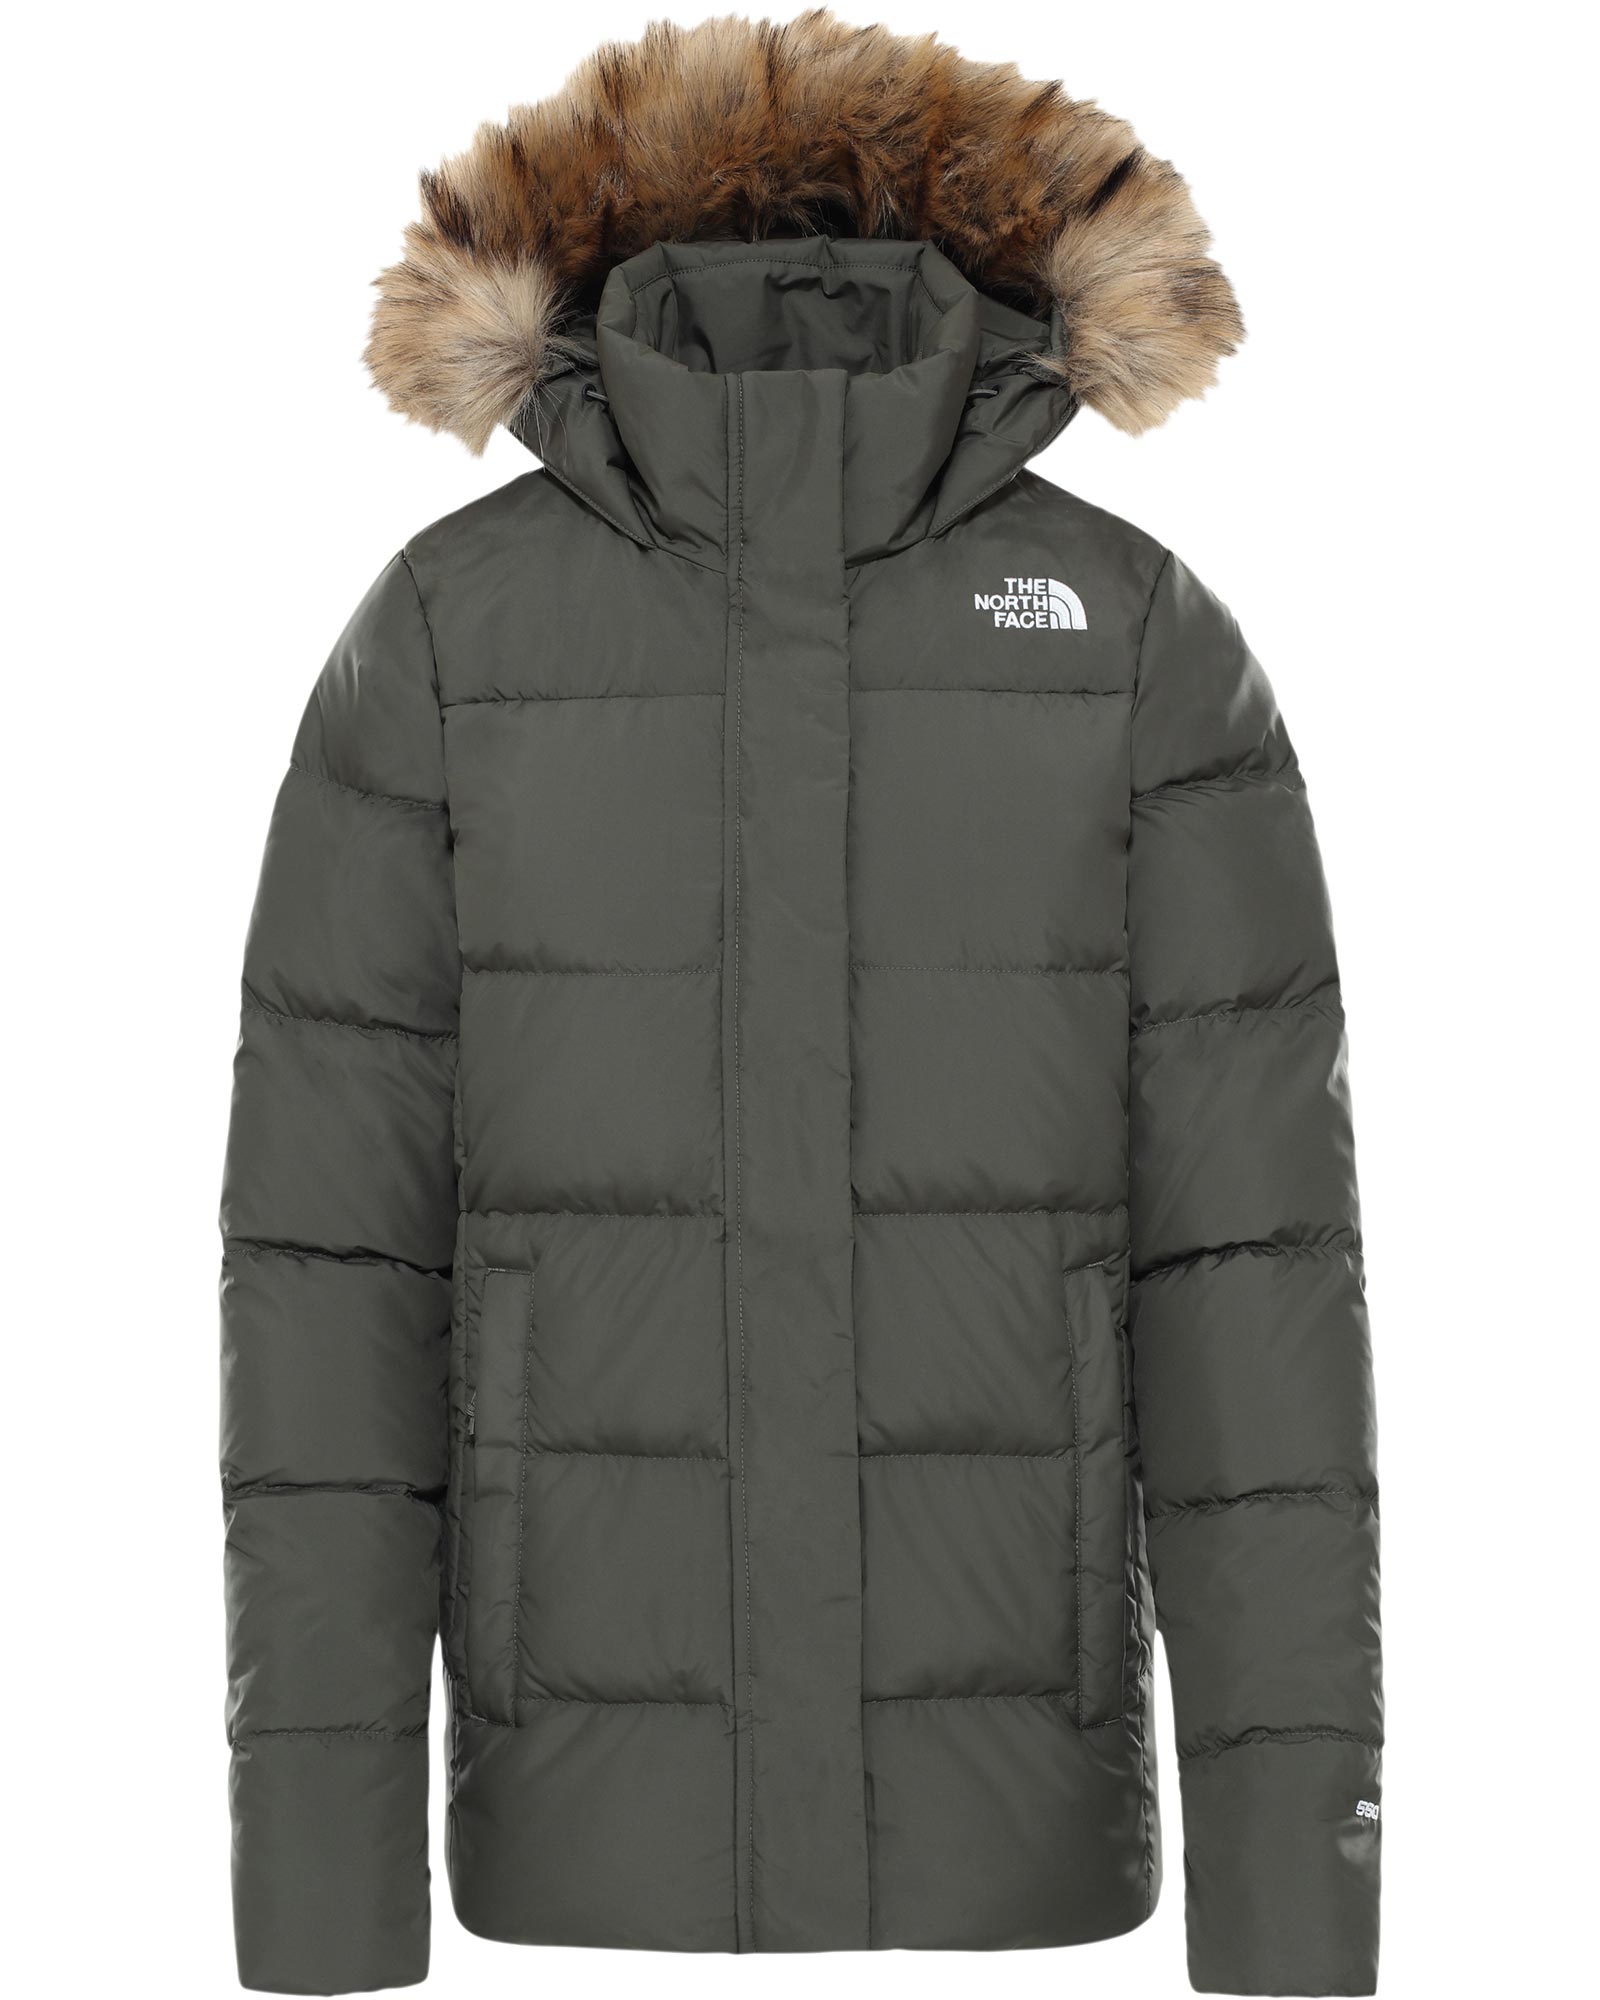 The North Face Gotham Women’s Jacket - New Taupe Green XS